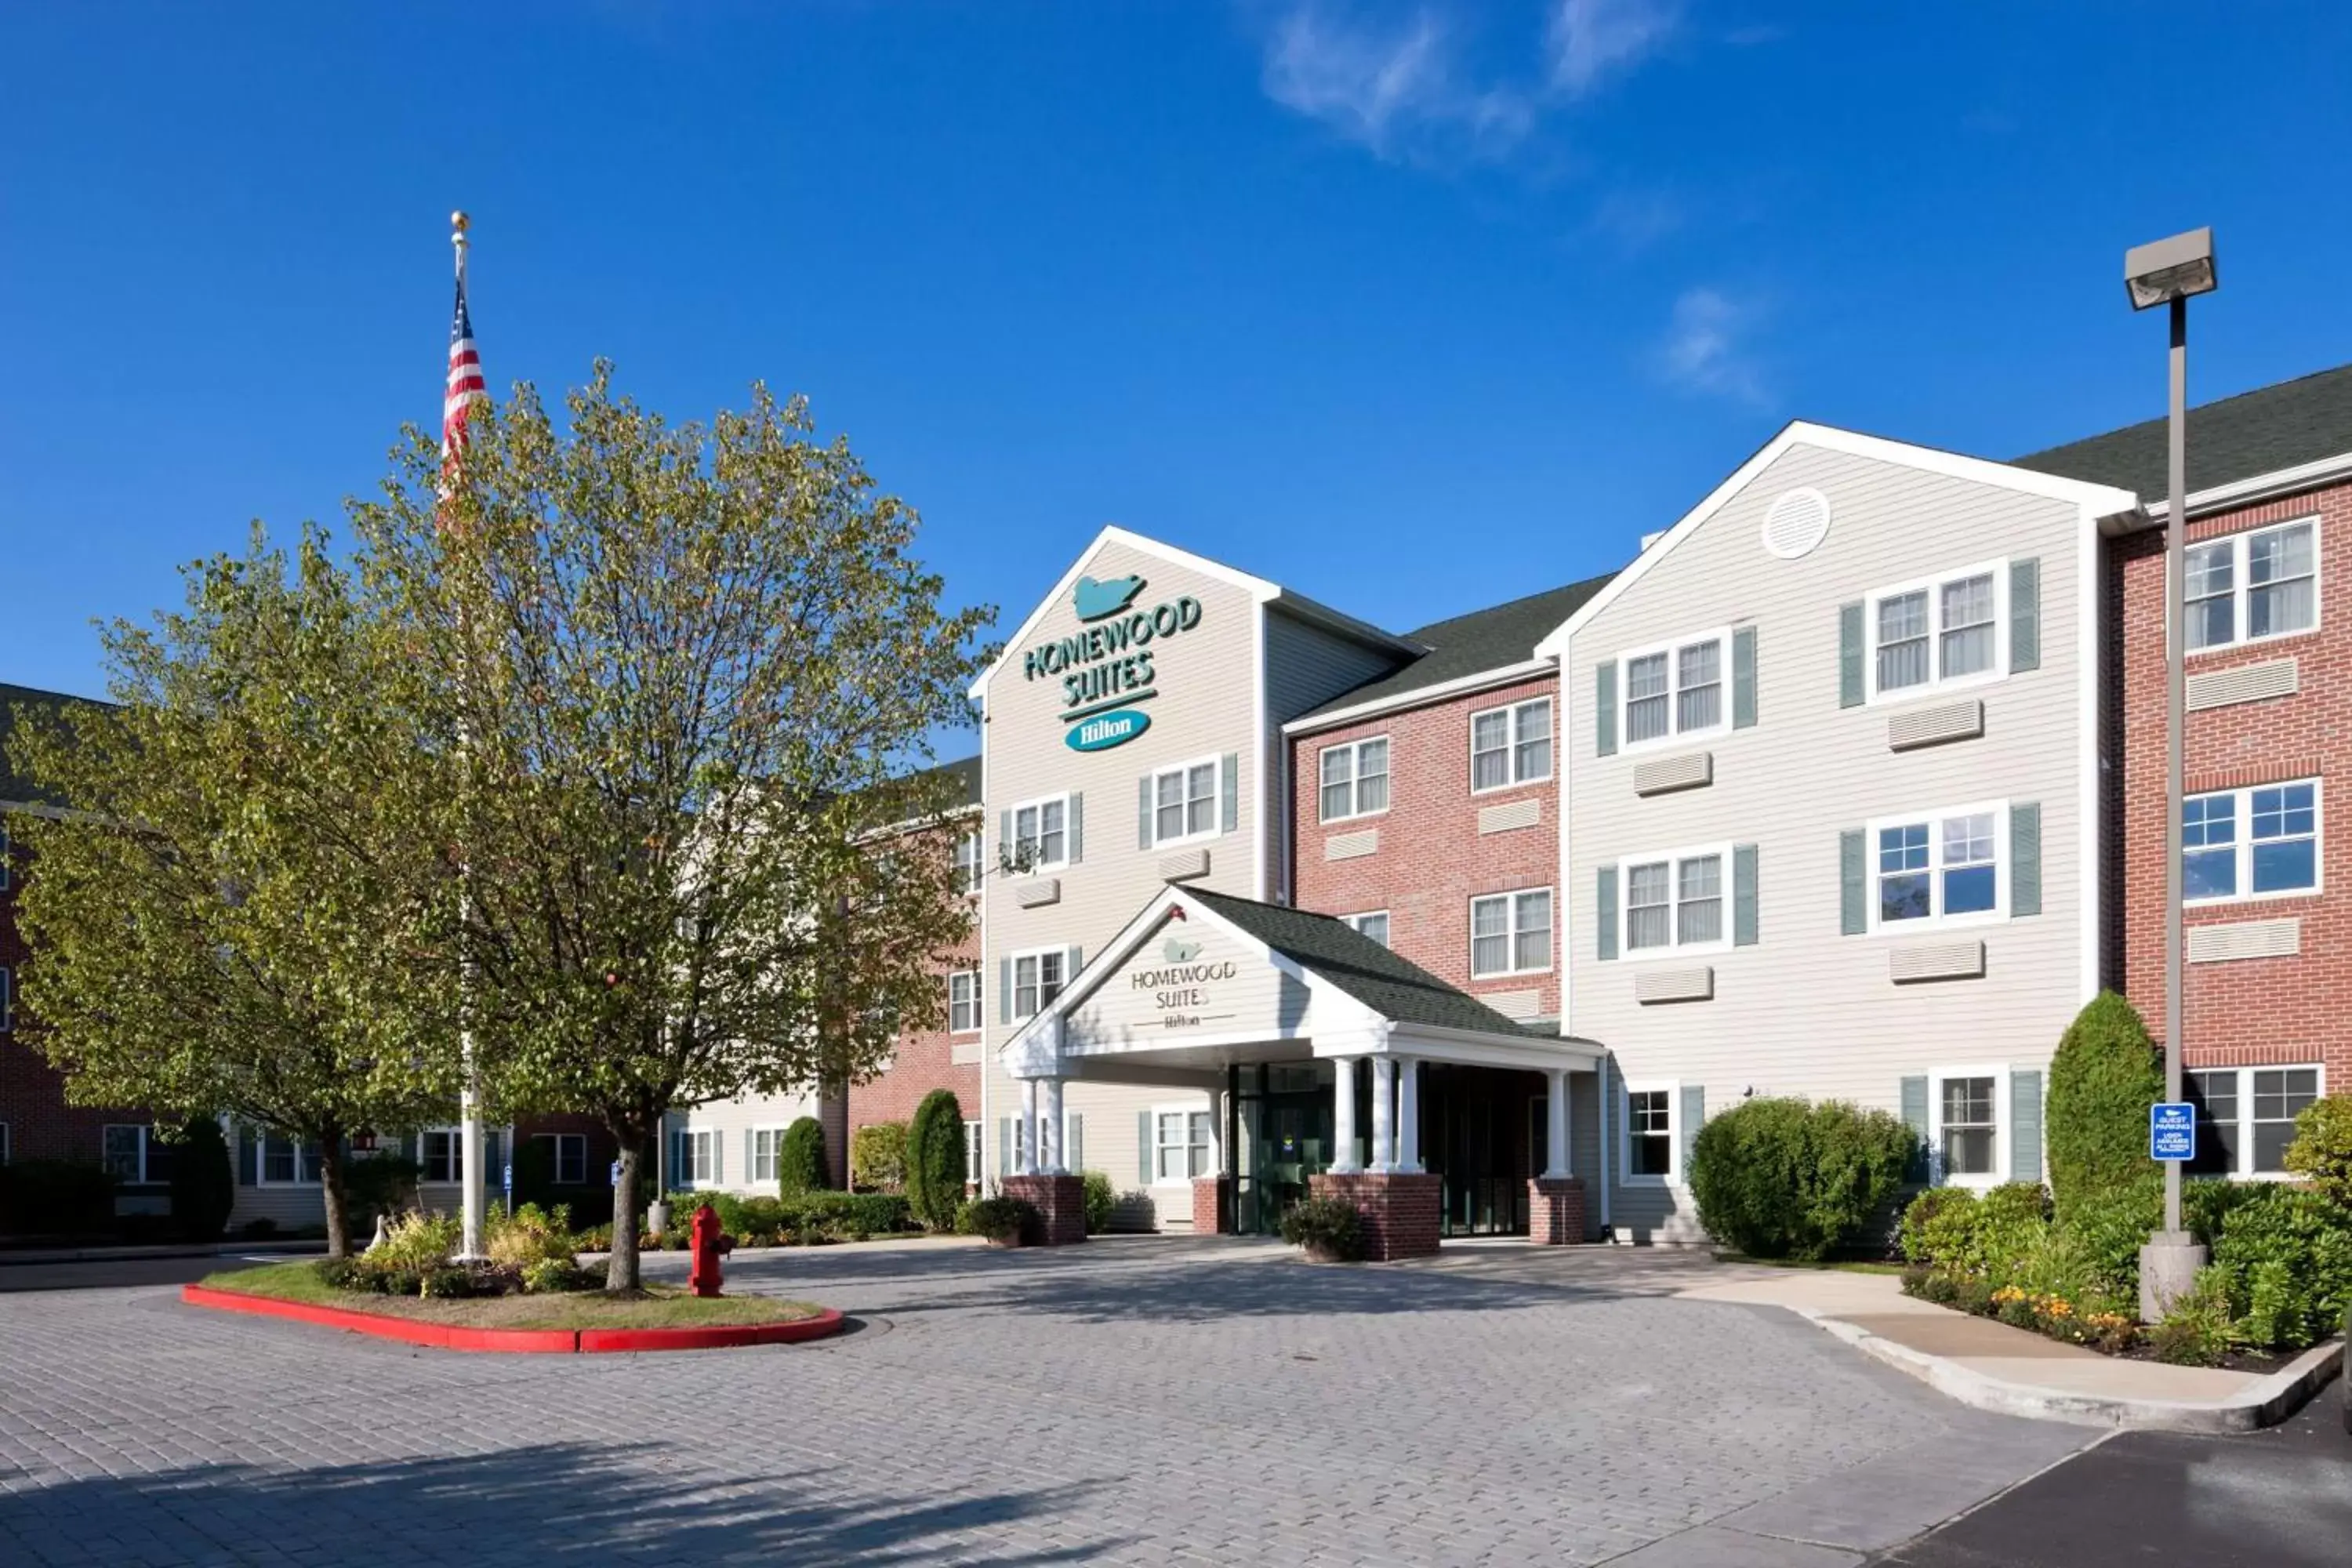 Property Building in Homewood Suites by Hilton Boston/Andover